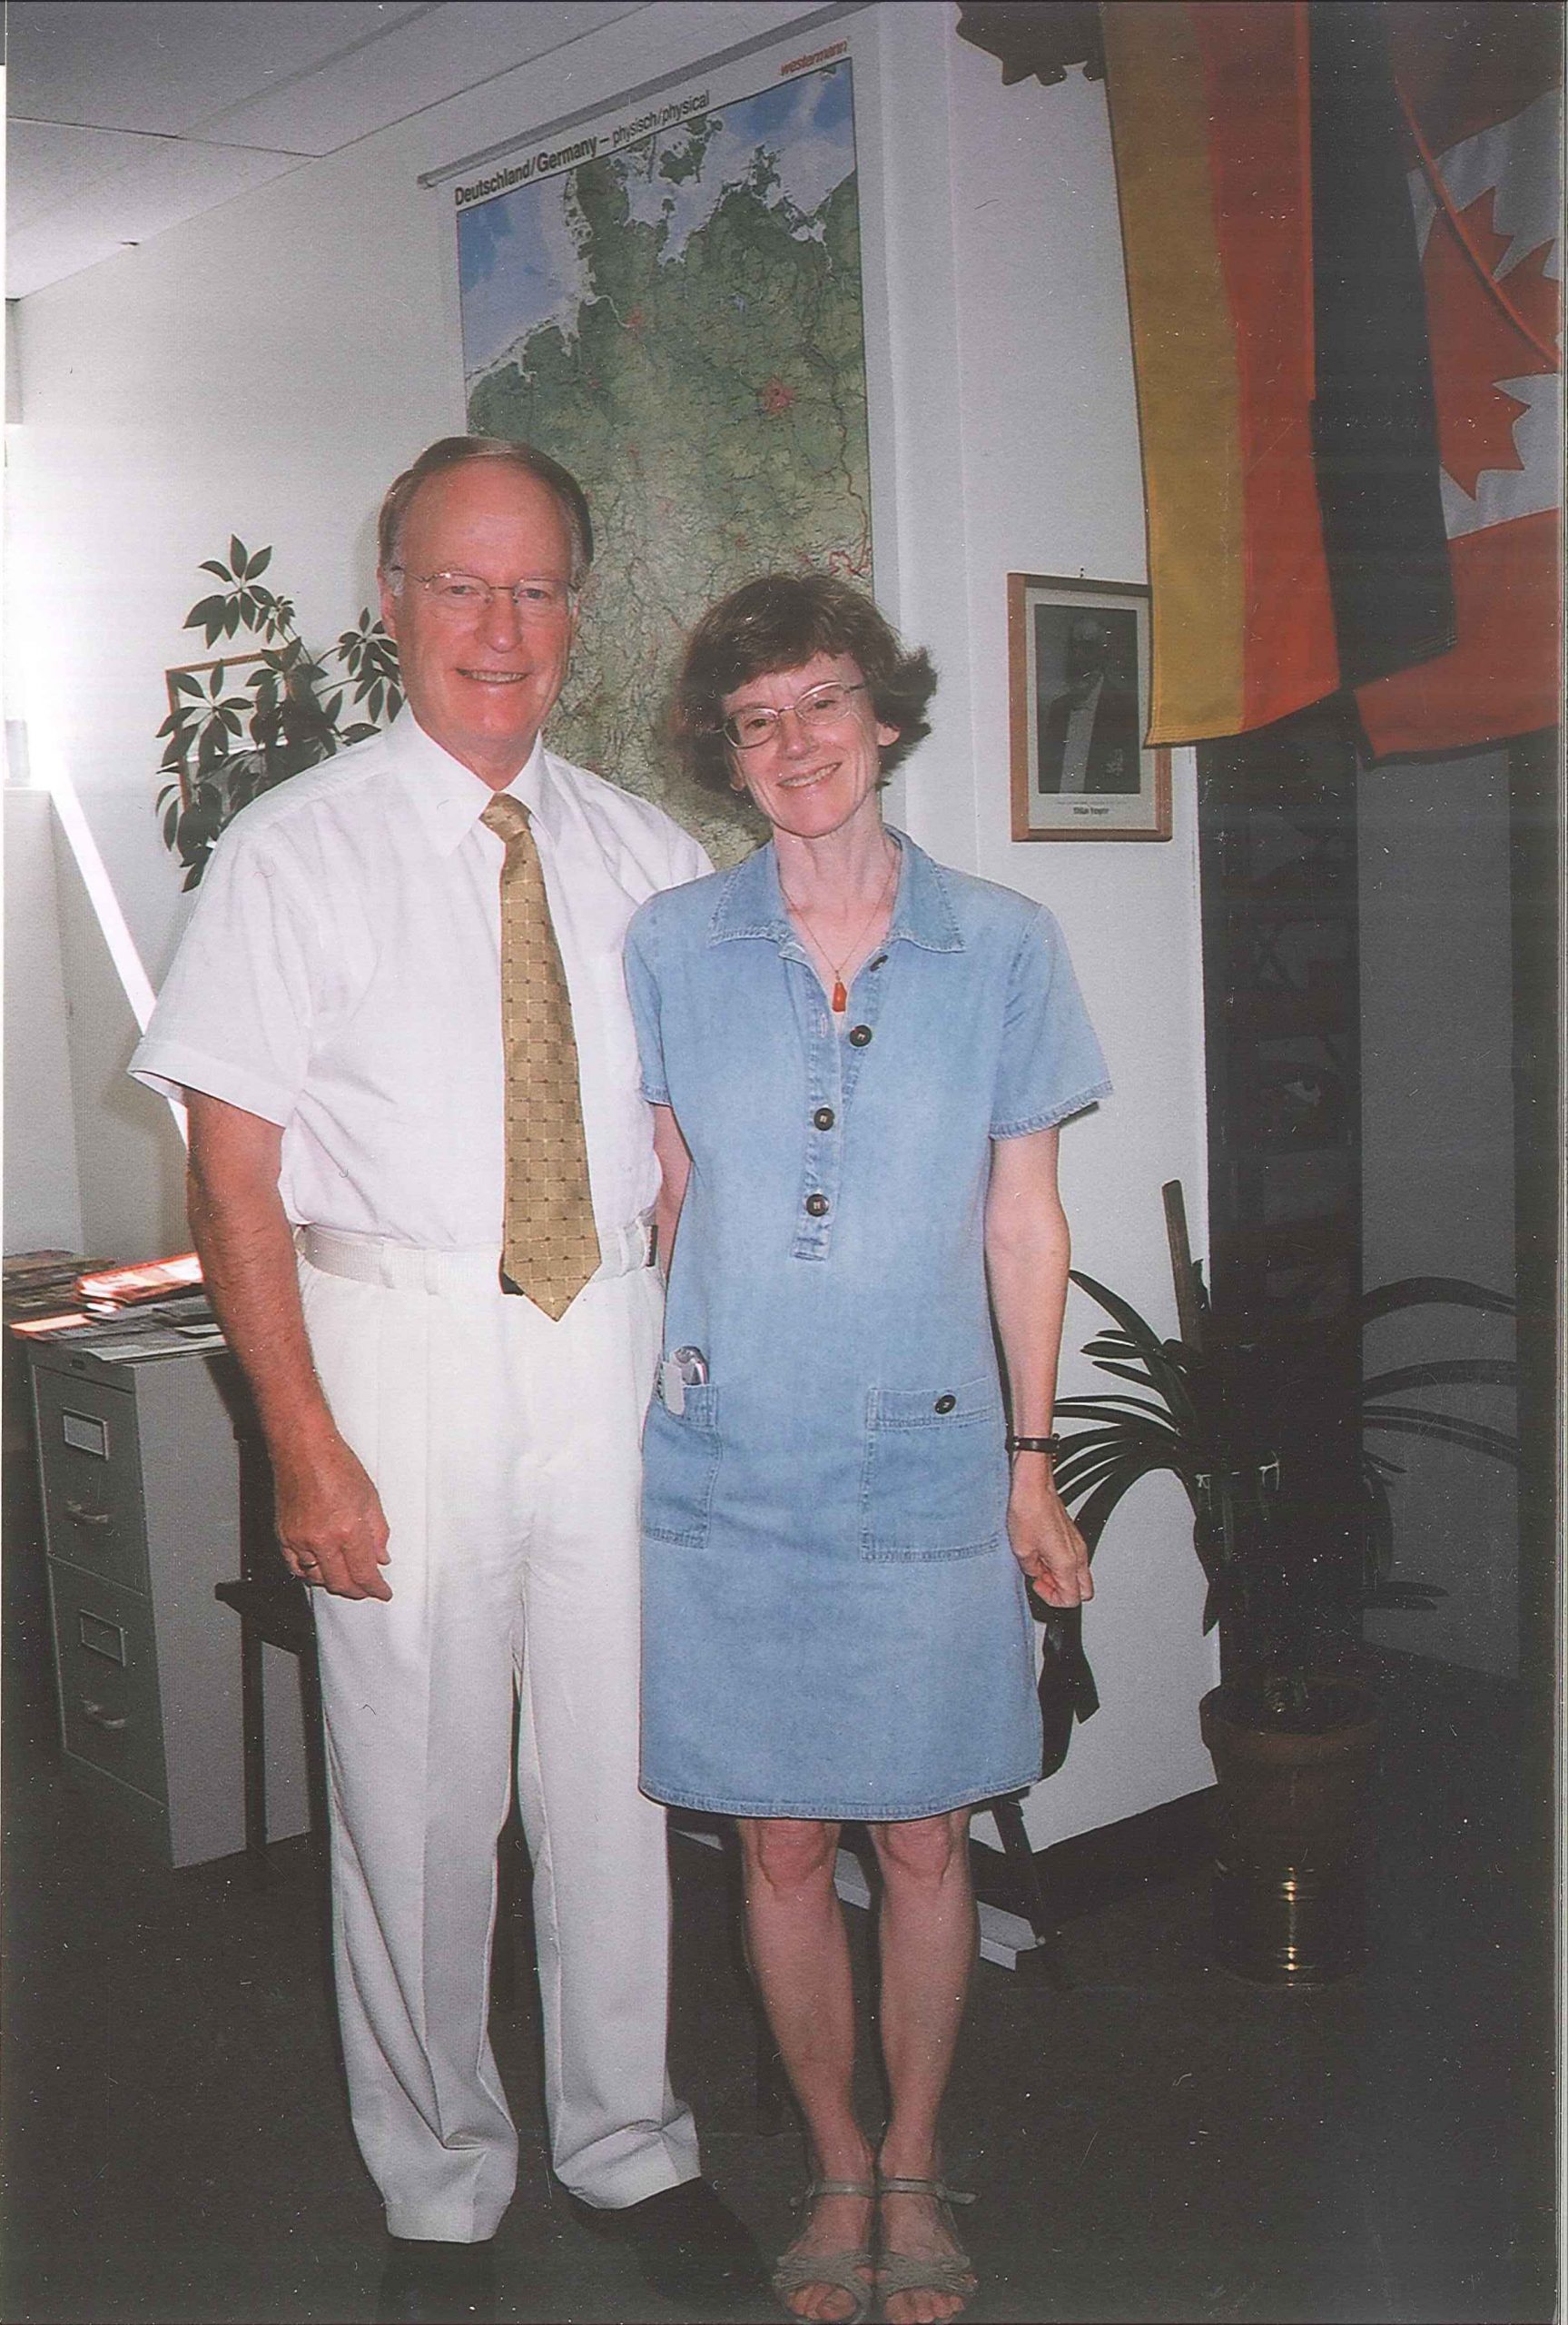 Deborah and Gerry Spindler standing inside the German Honorary Consul in Winnipeg Manitoba. In the background is a map of Germany, and German and Canadian flags.